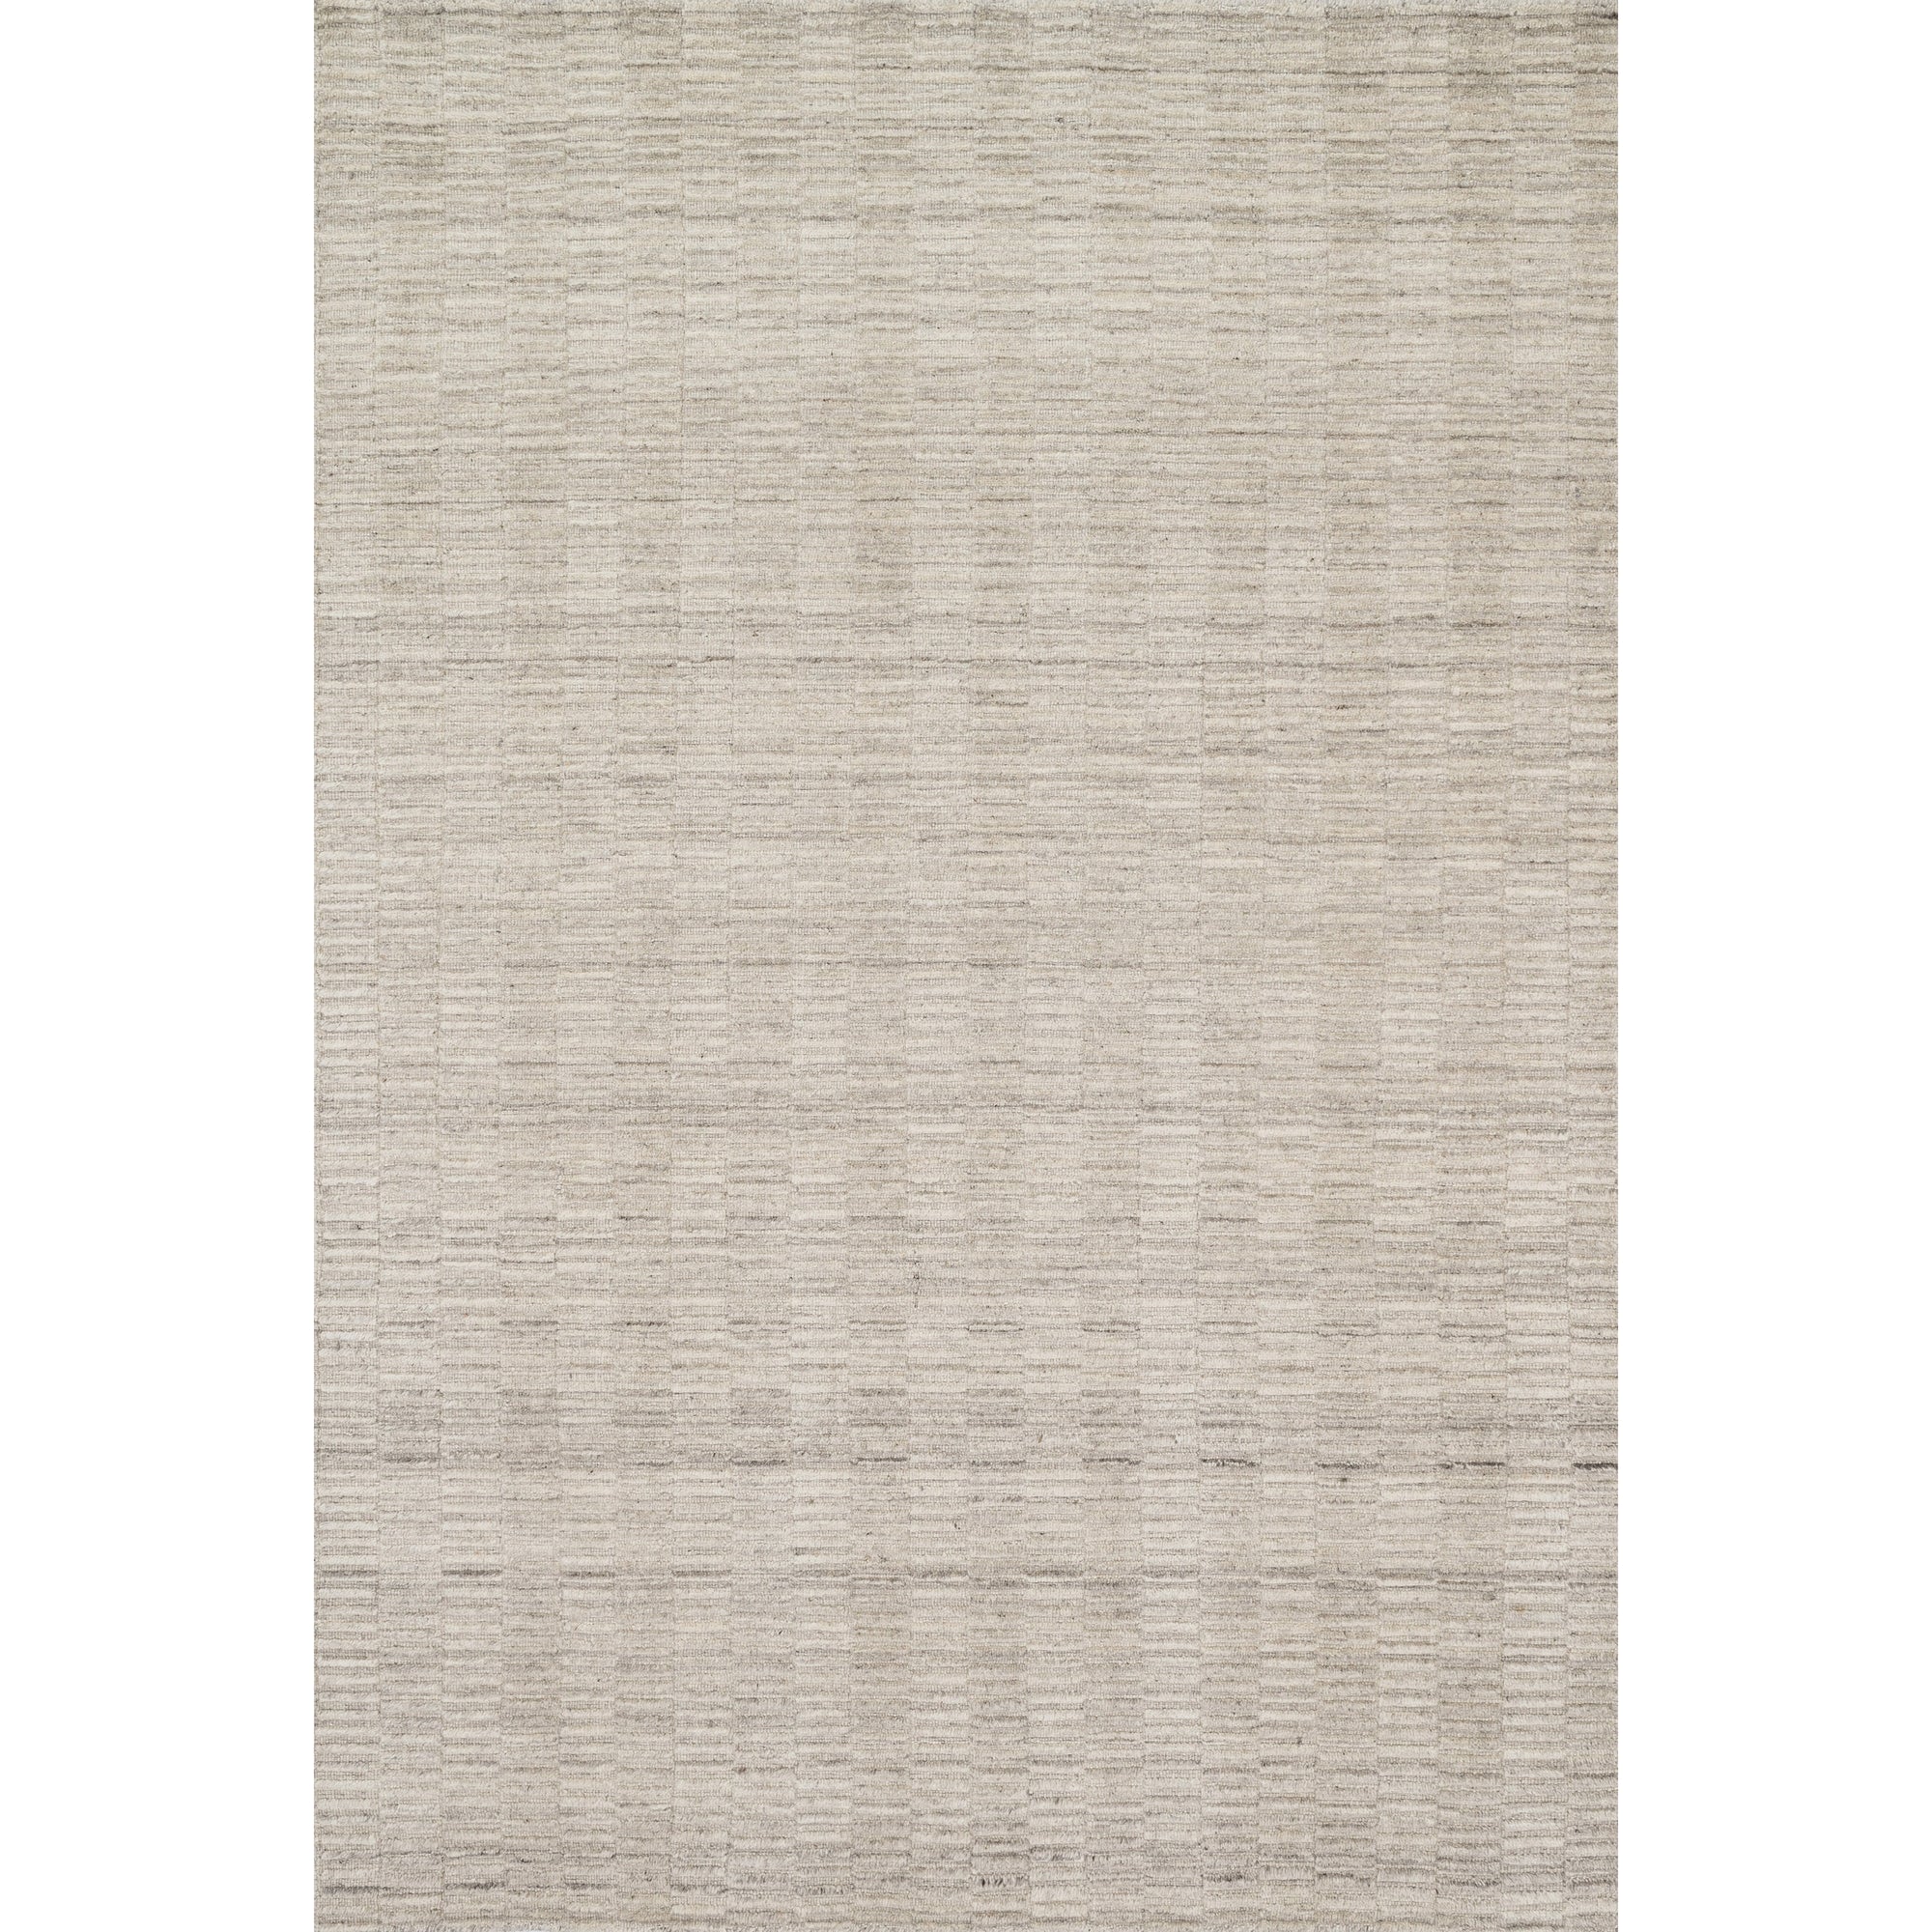 Rugs by Roo Loloi Hadley Oatmeal Area Rug in size 3' 6" x 5' 6"